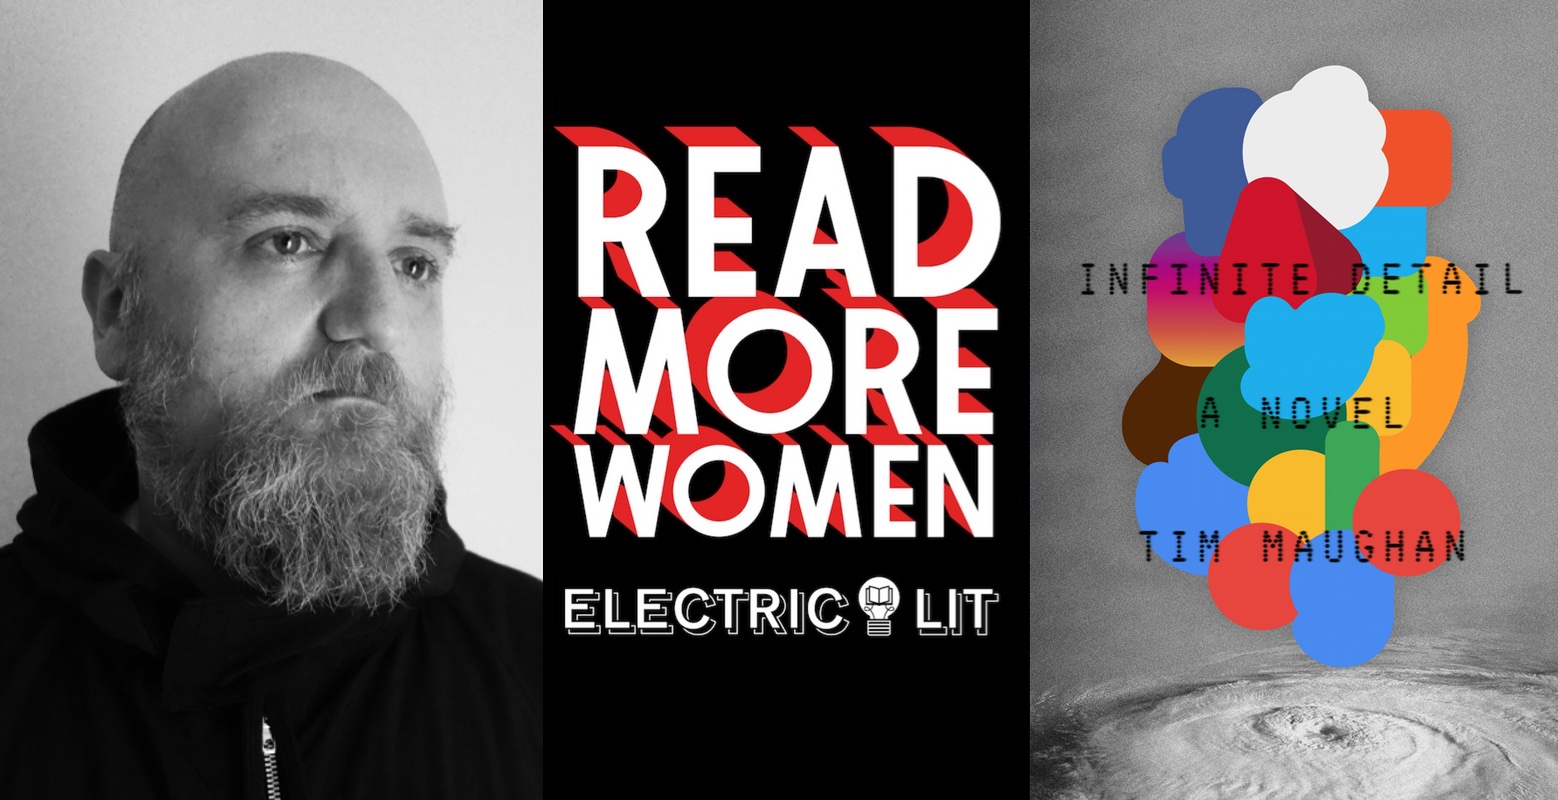 Tim Maughan, his book Infinite Detail, and the Read More Women logo